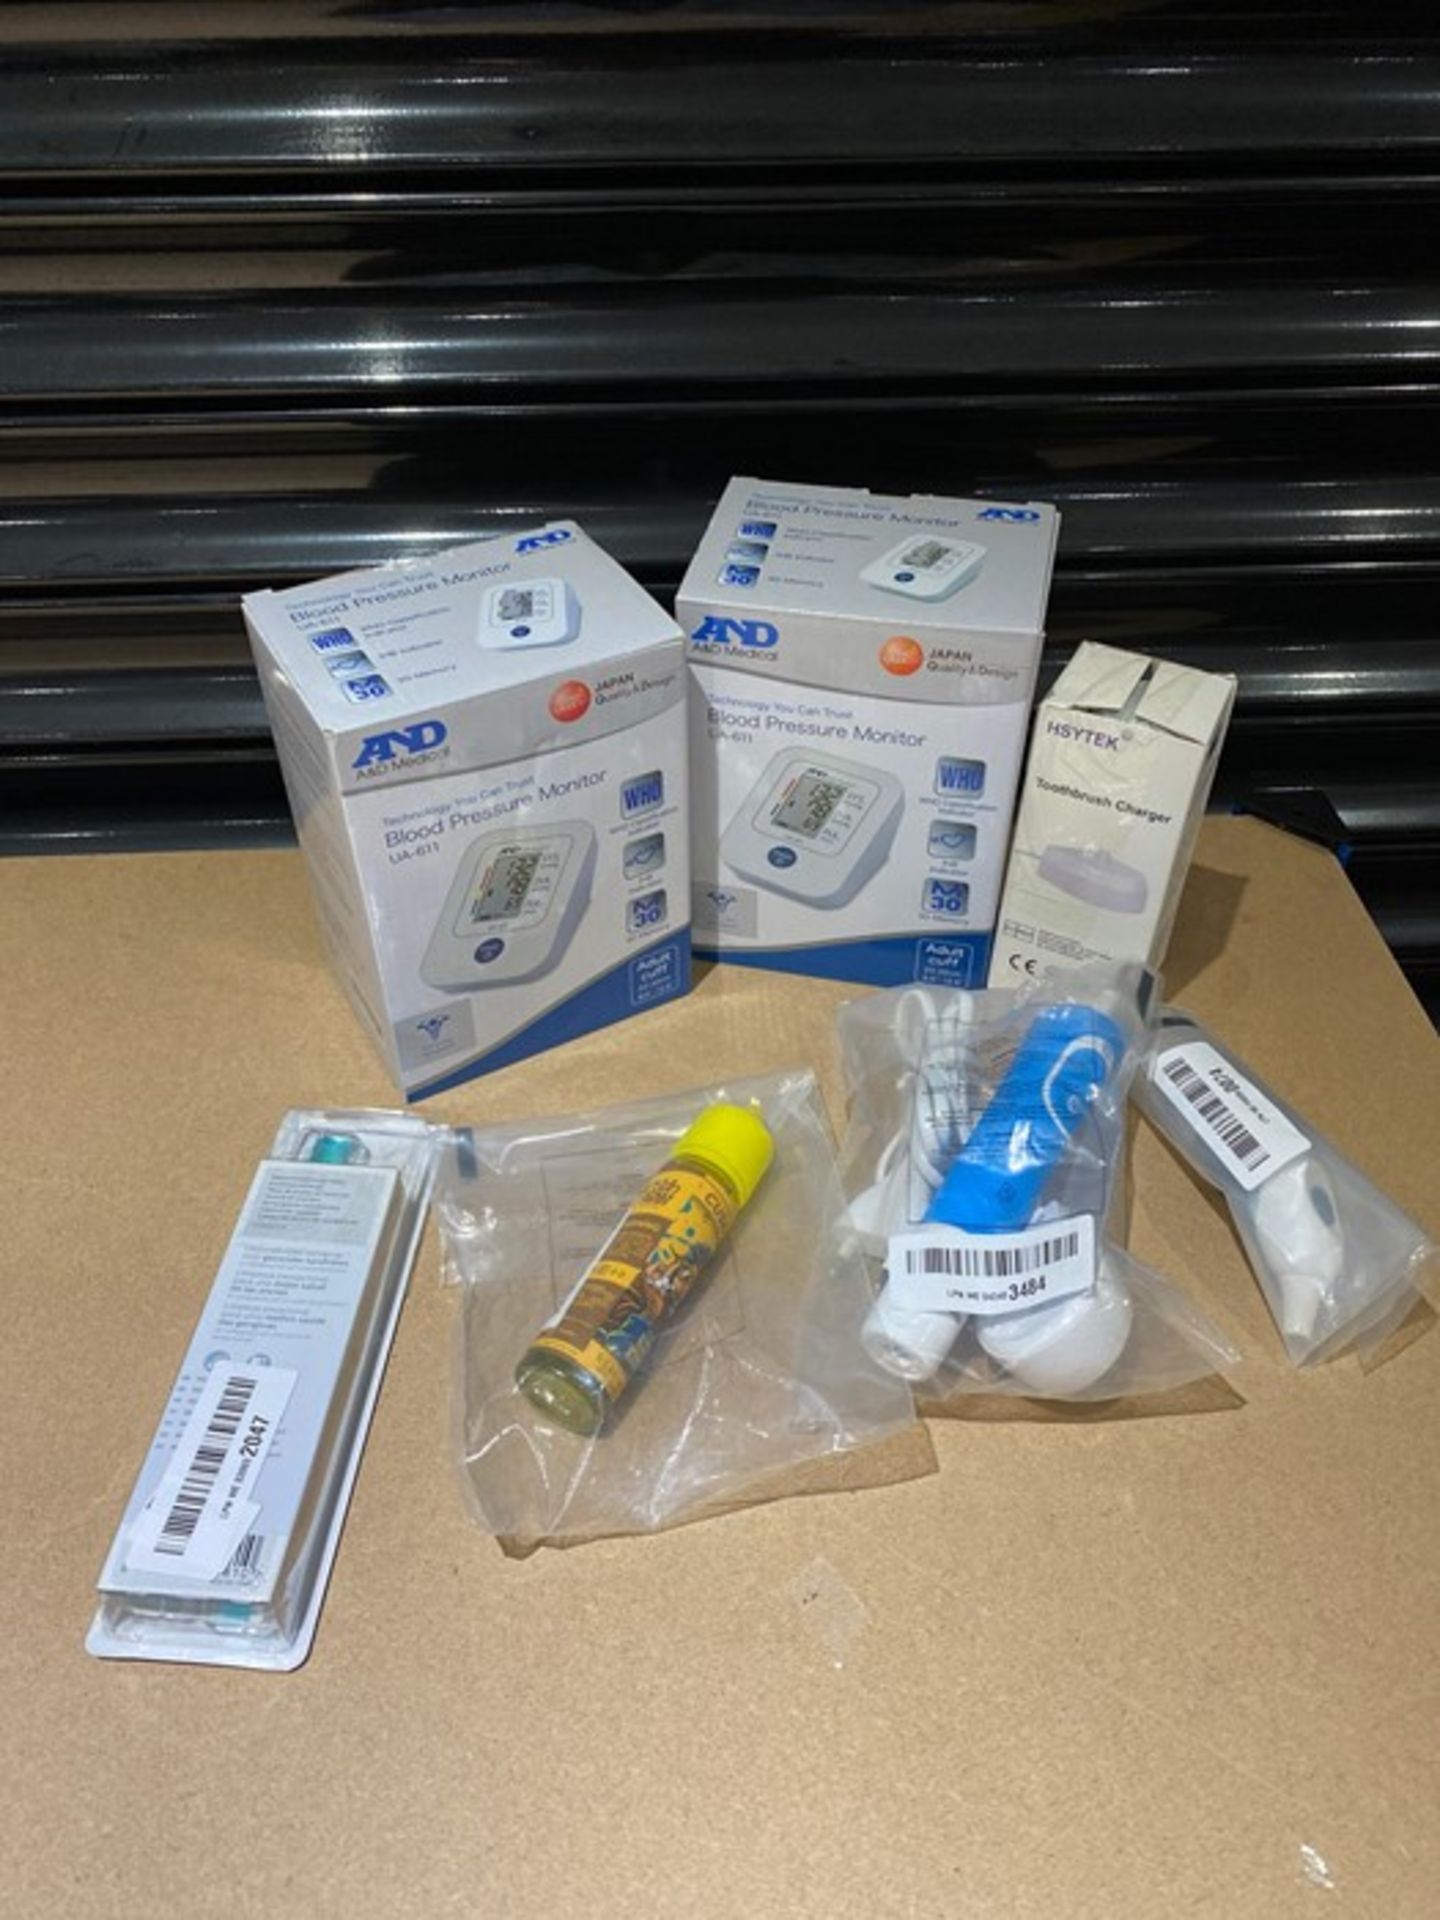 COMBINED RRP £120.00 LOT TO CONTAIN 7 ASSORTED Personal Care Appliances: Oral-B, HSYTEK, Philip